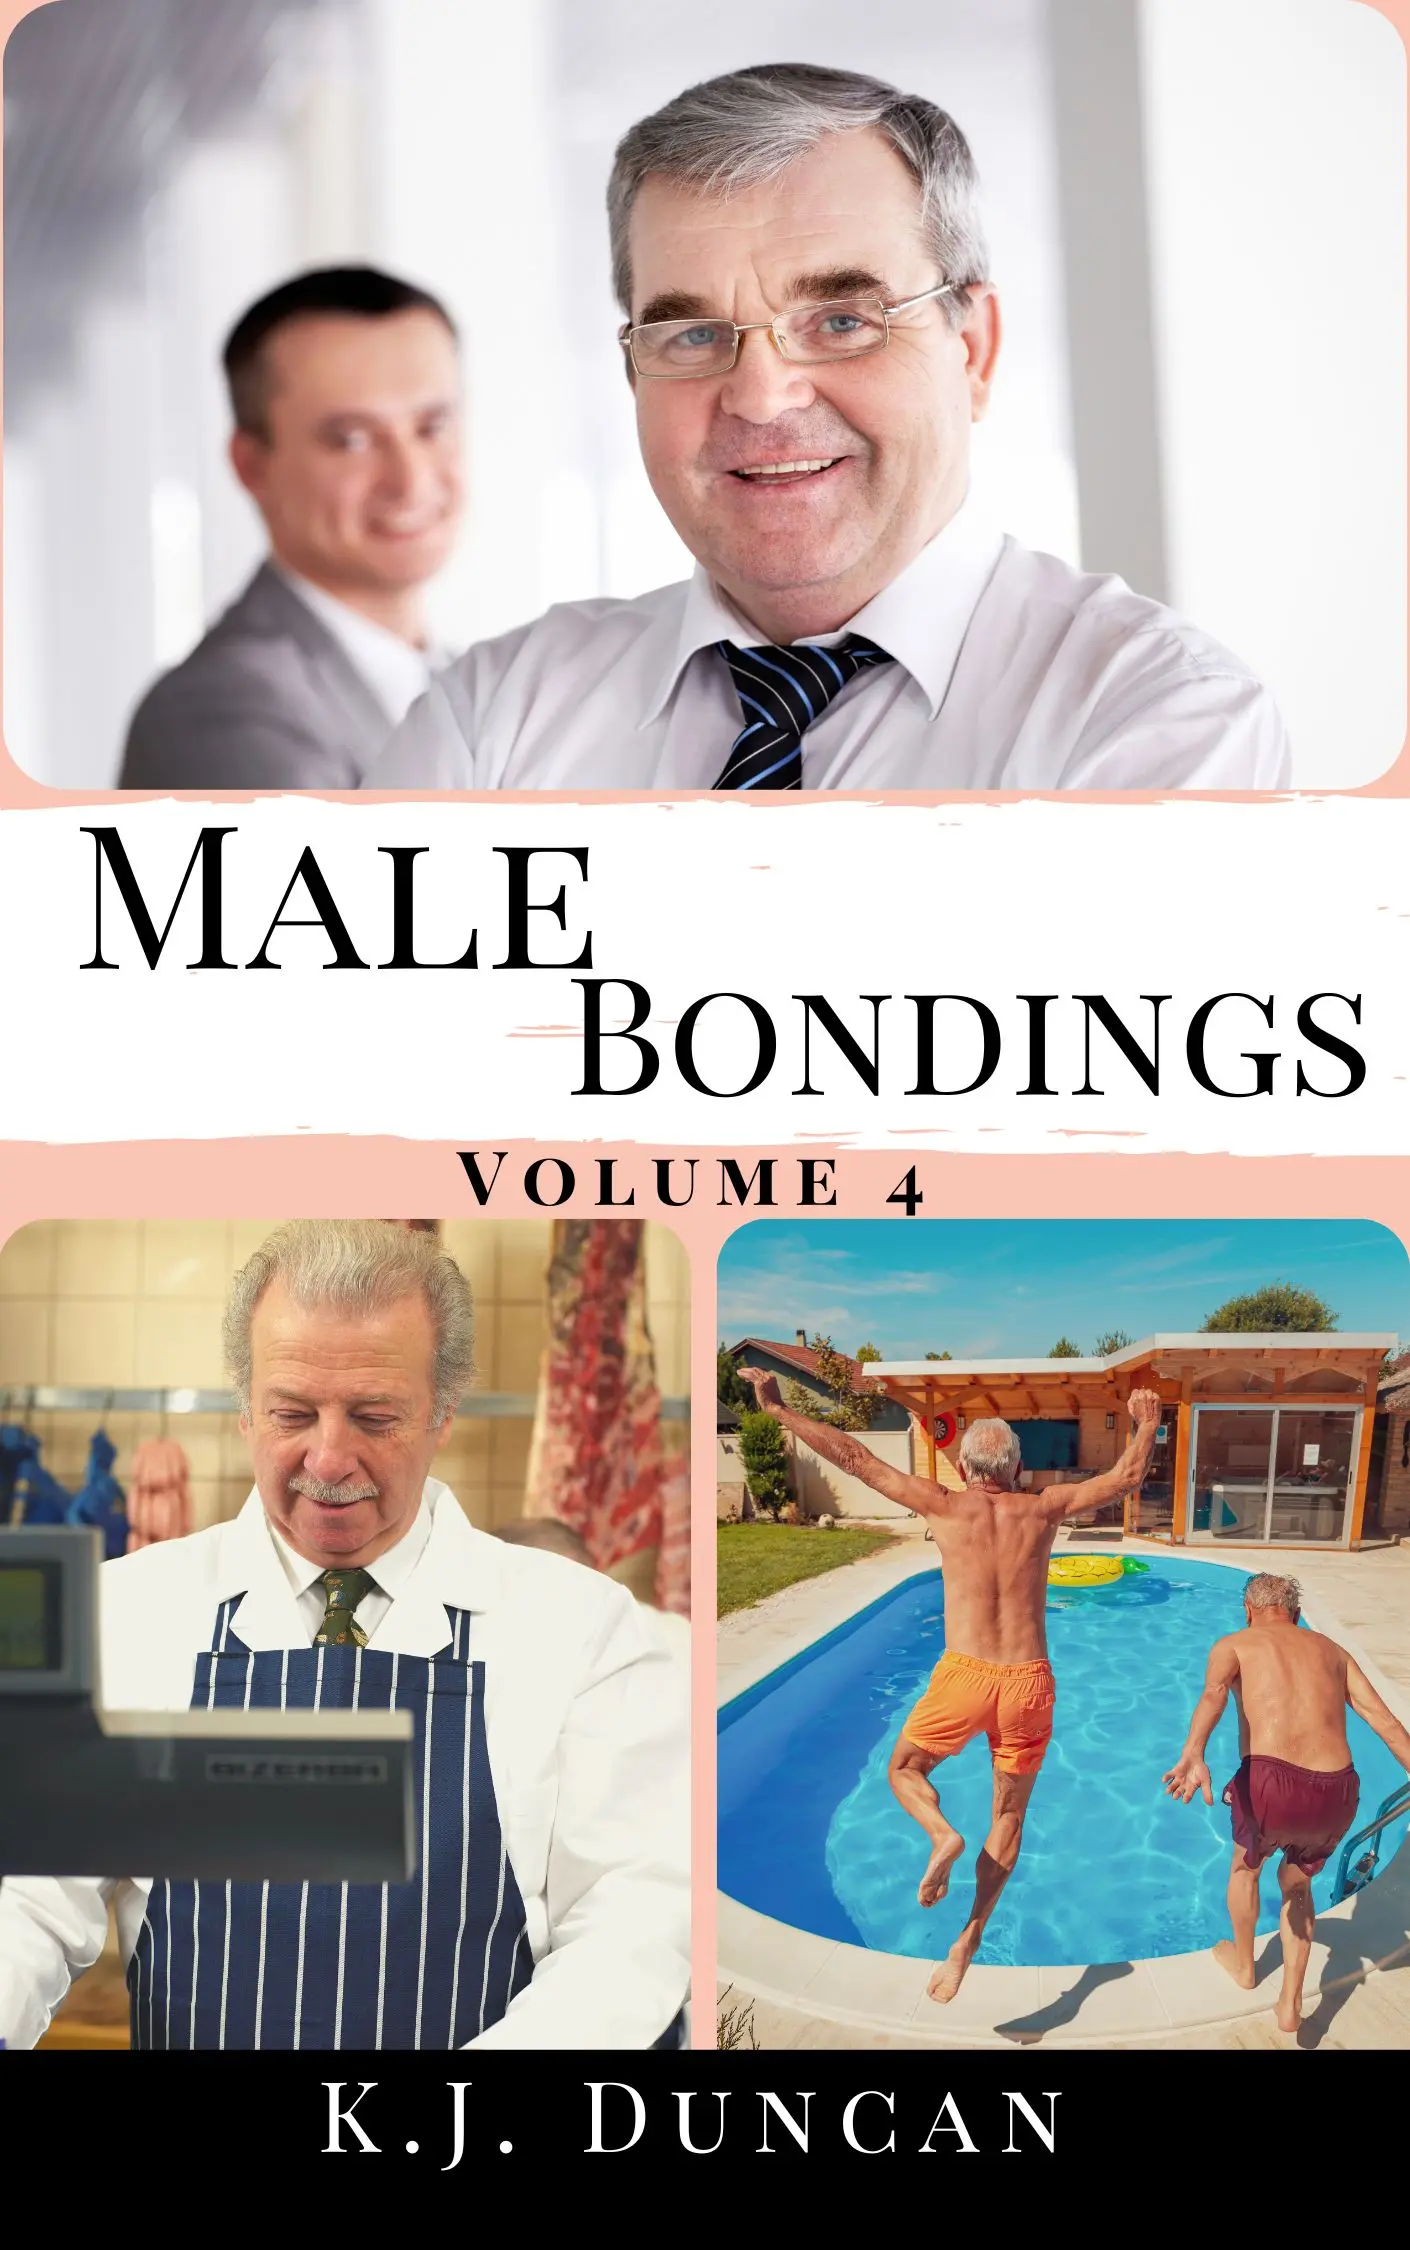 Male Bondings 4 book cover showing several sexy older men